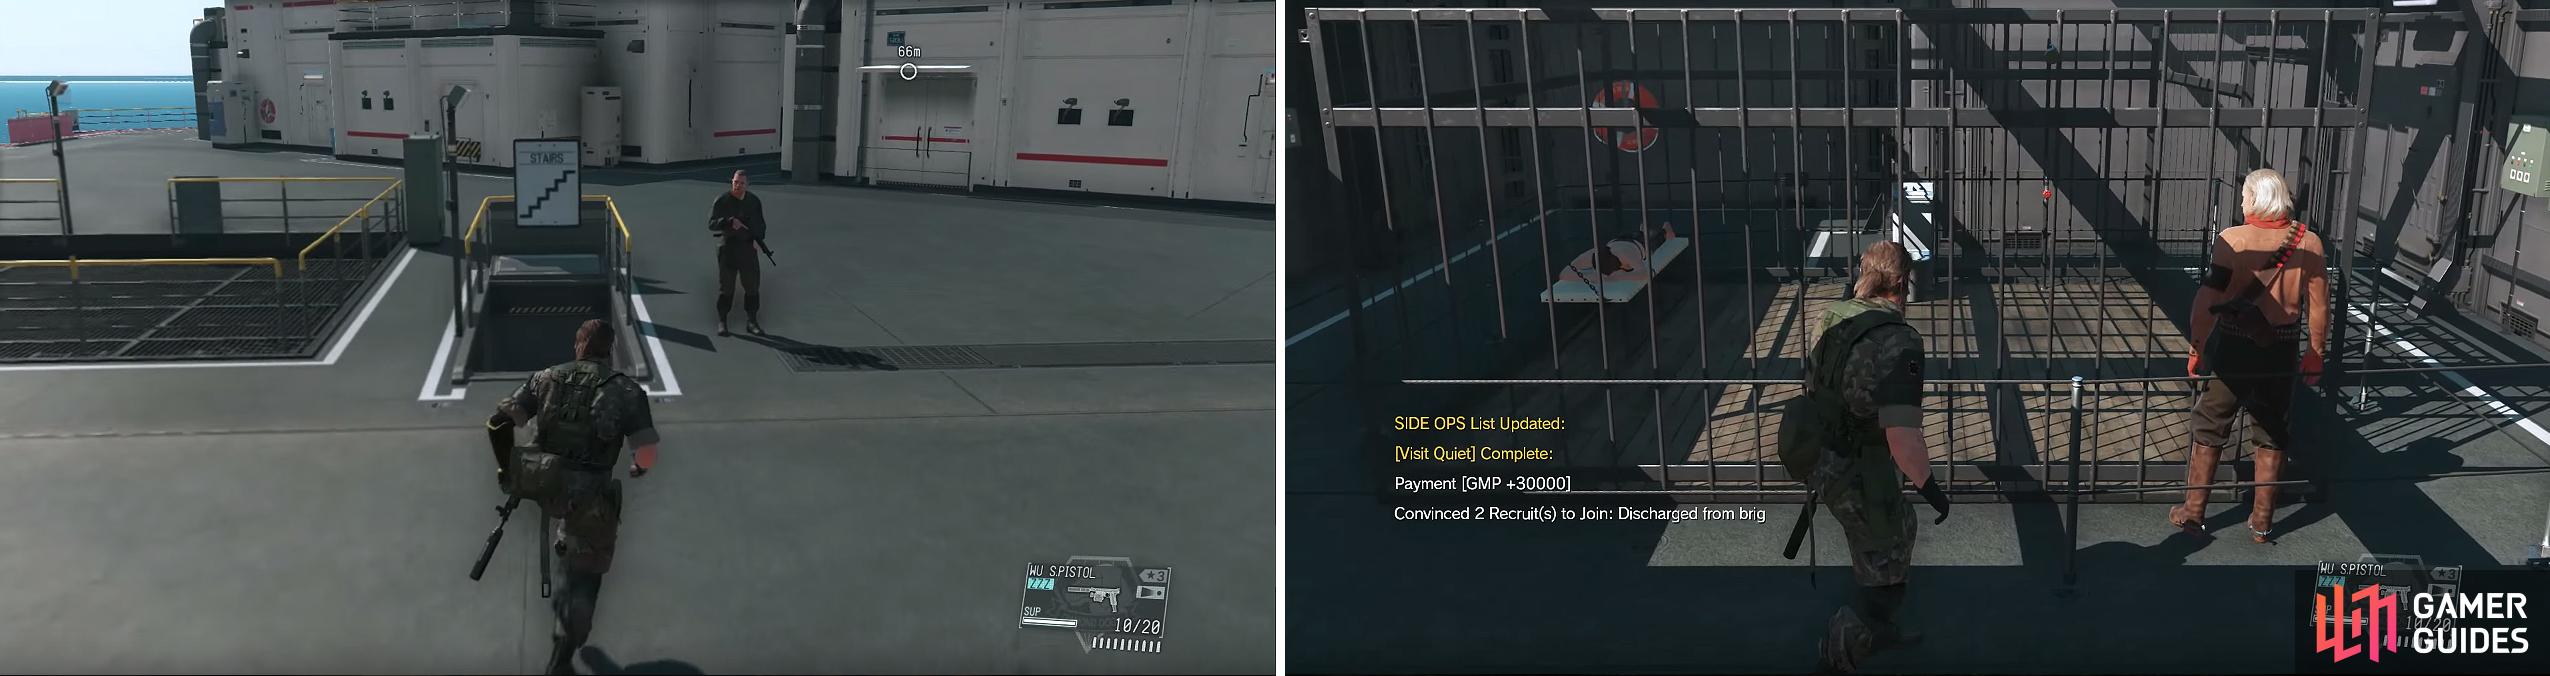 Take the stairs down to the cells (left) and then listen to Ocelot’s conversation about Quiet (right). Afterwards, she will be unlocked as a Buddy.